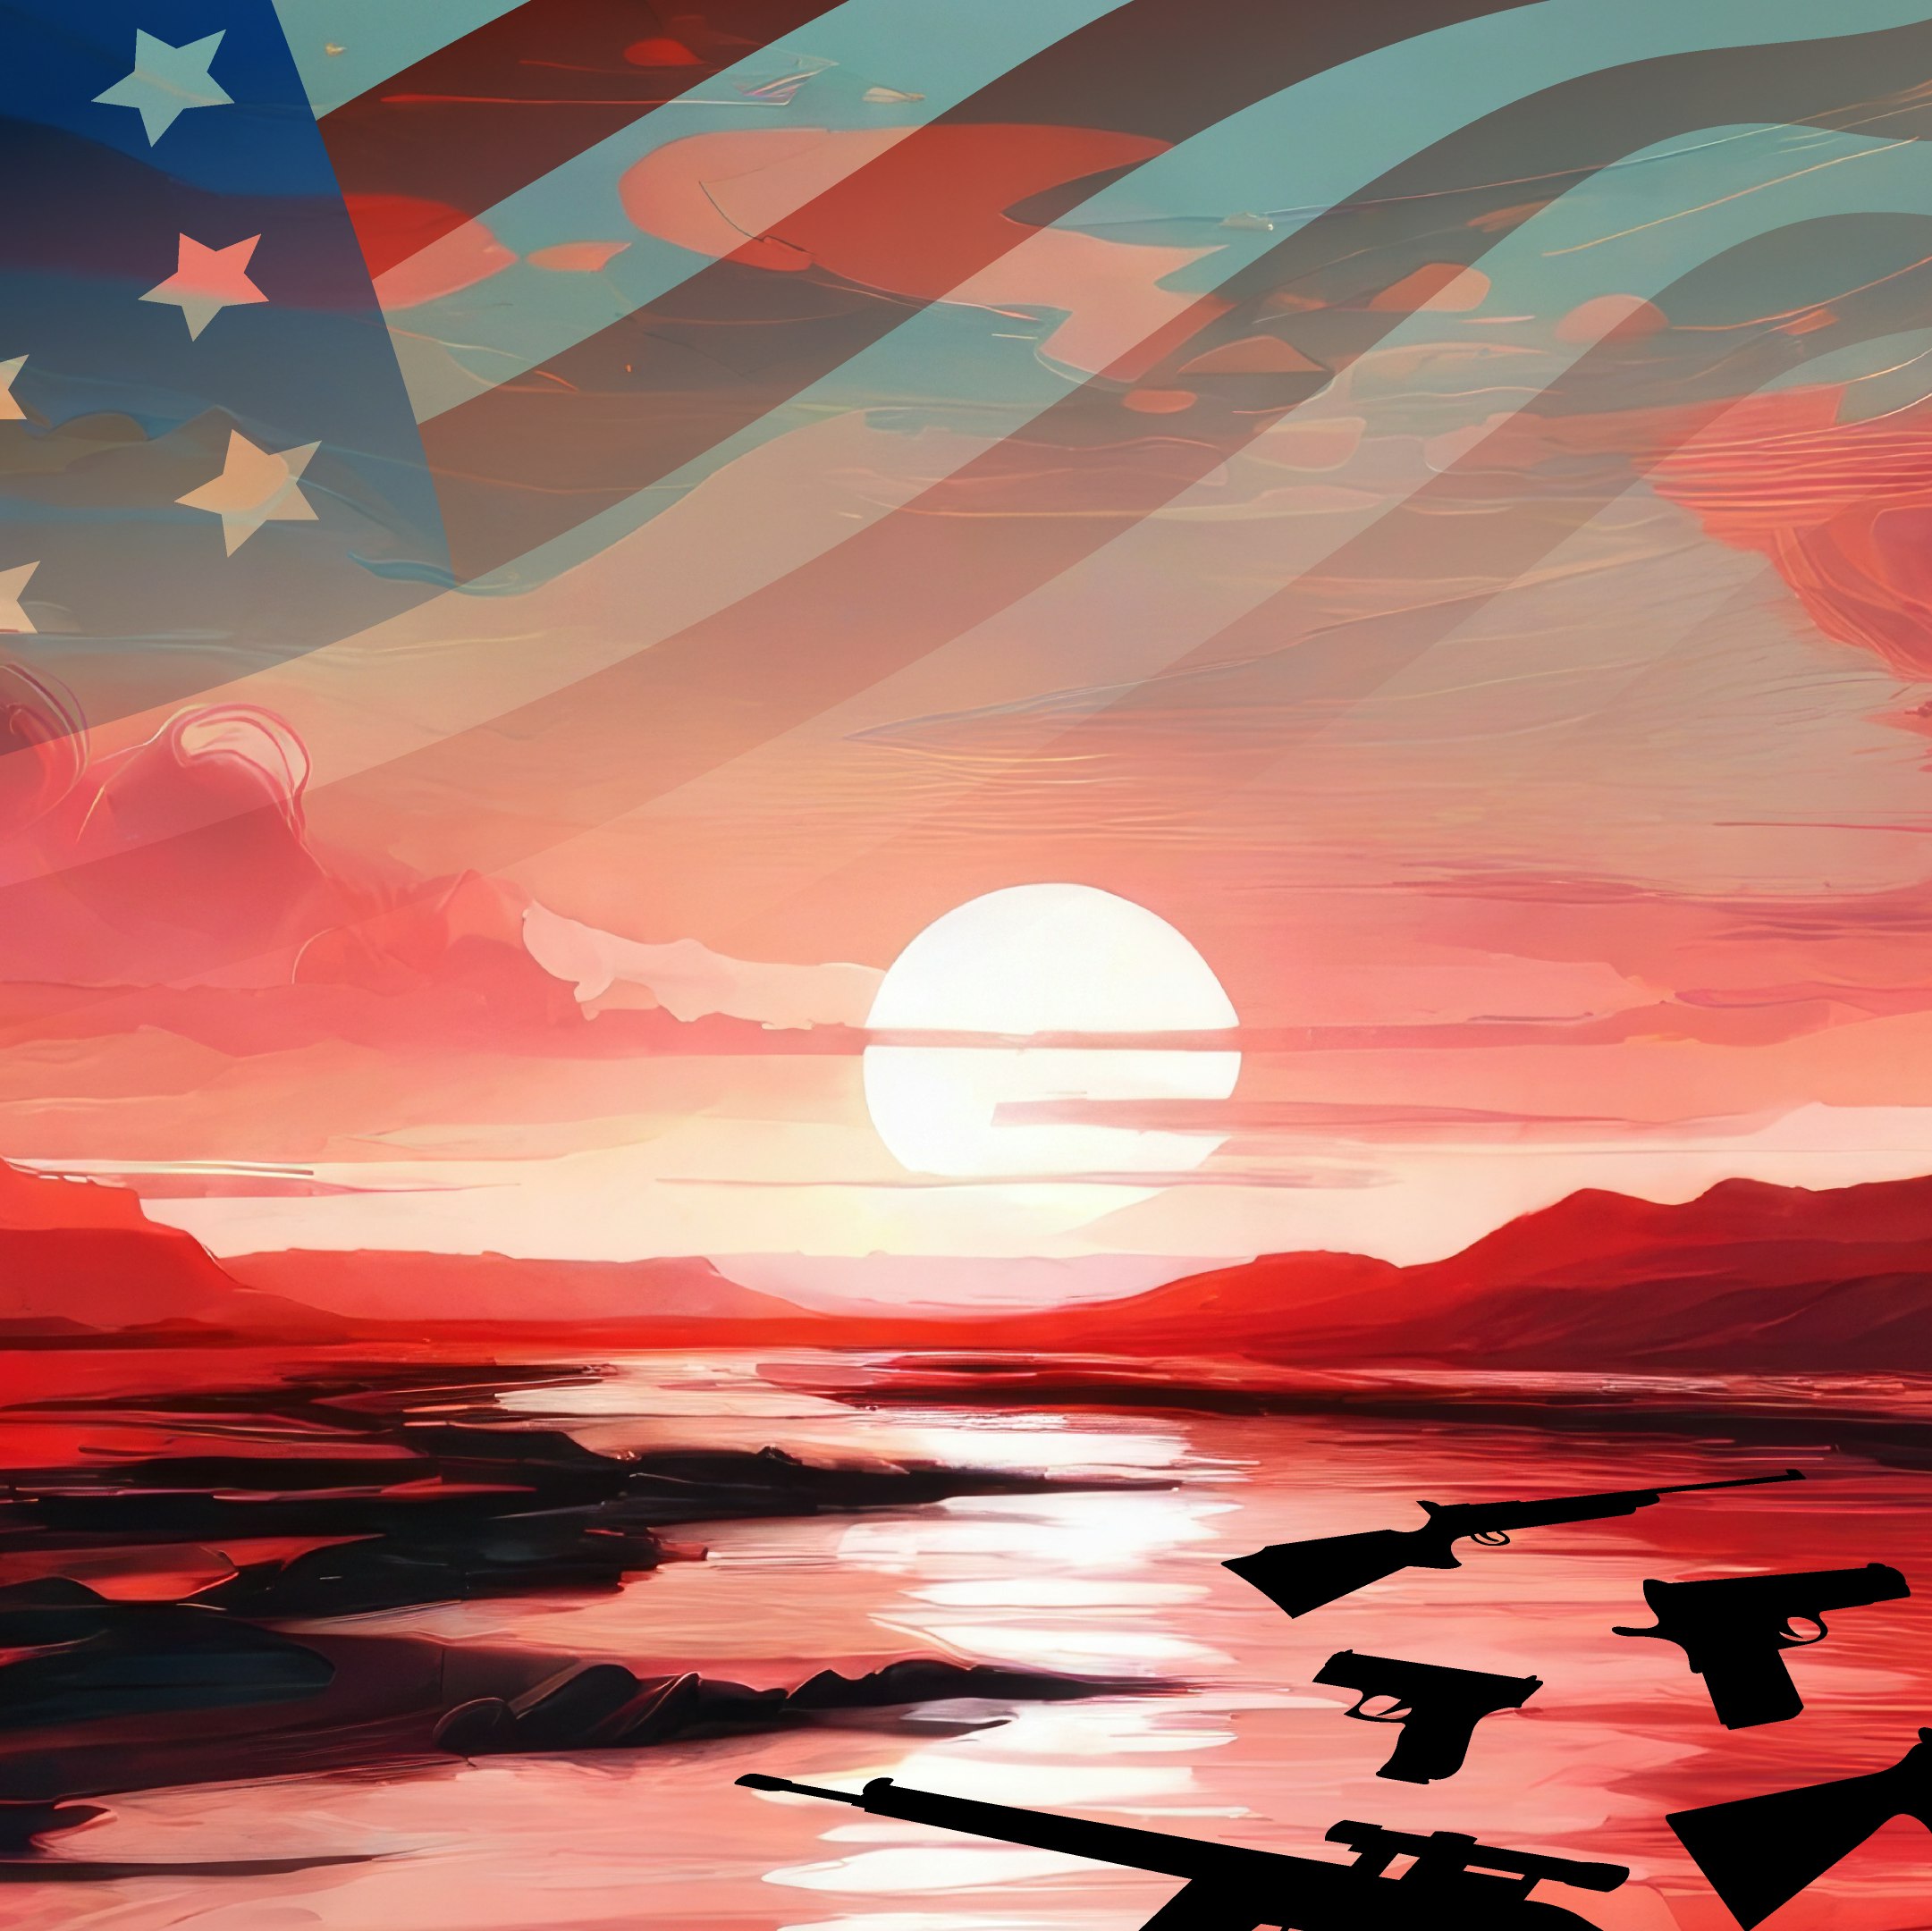 Illustration of an aAmerican flag flying over the sun setting on a moatly red river that has guns floating in it.